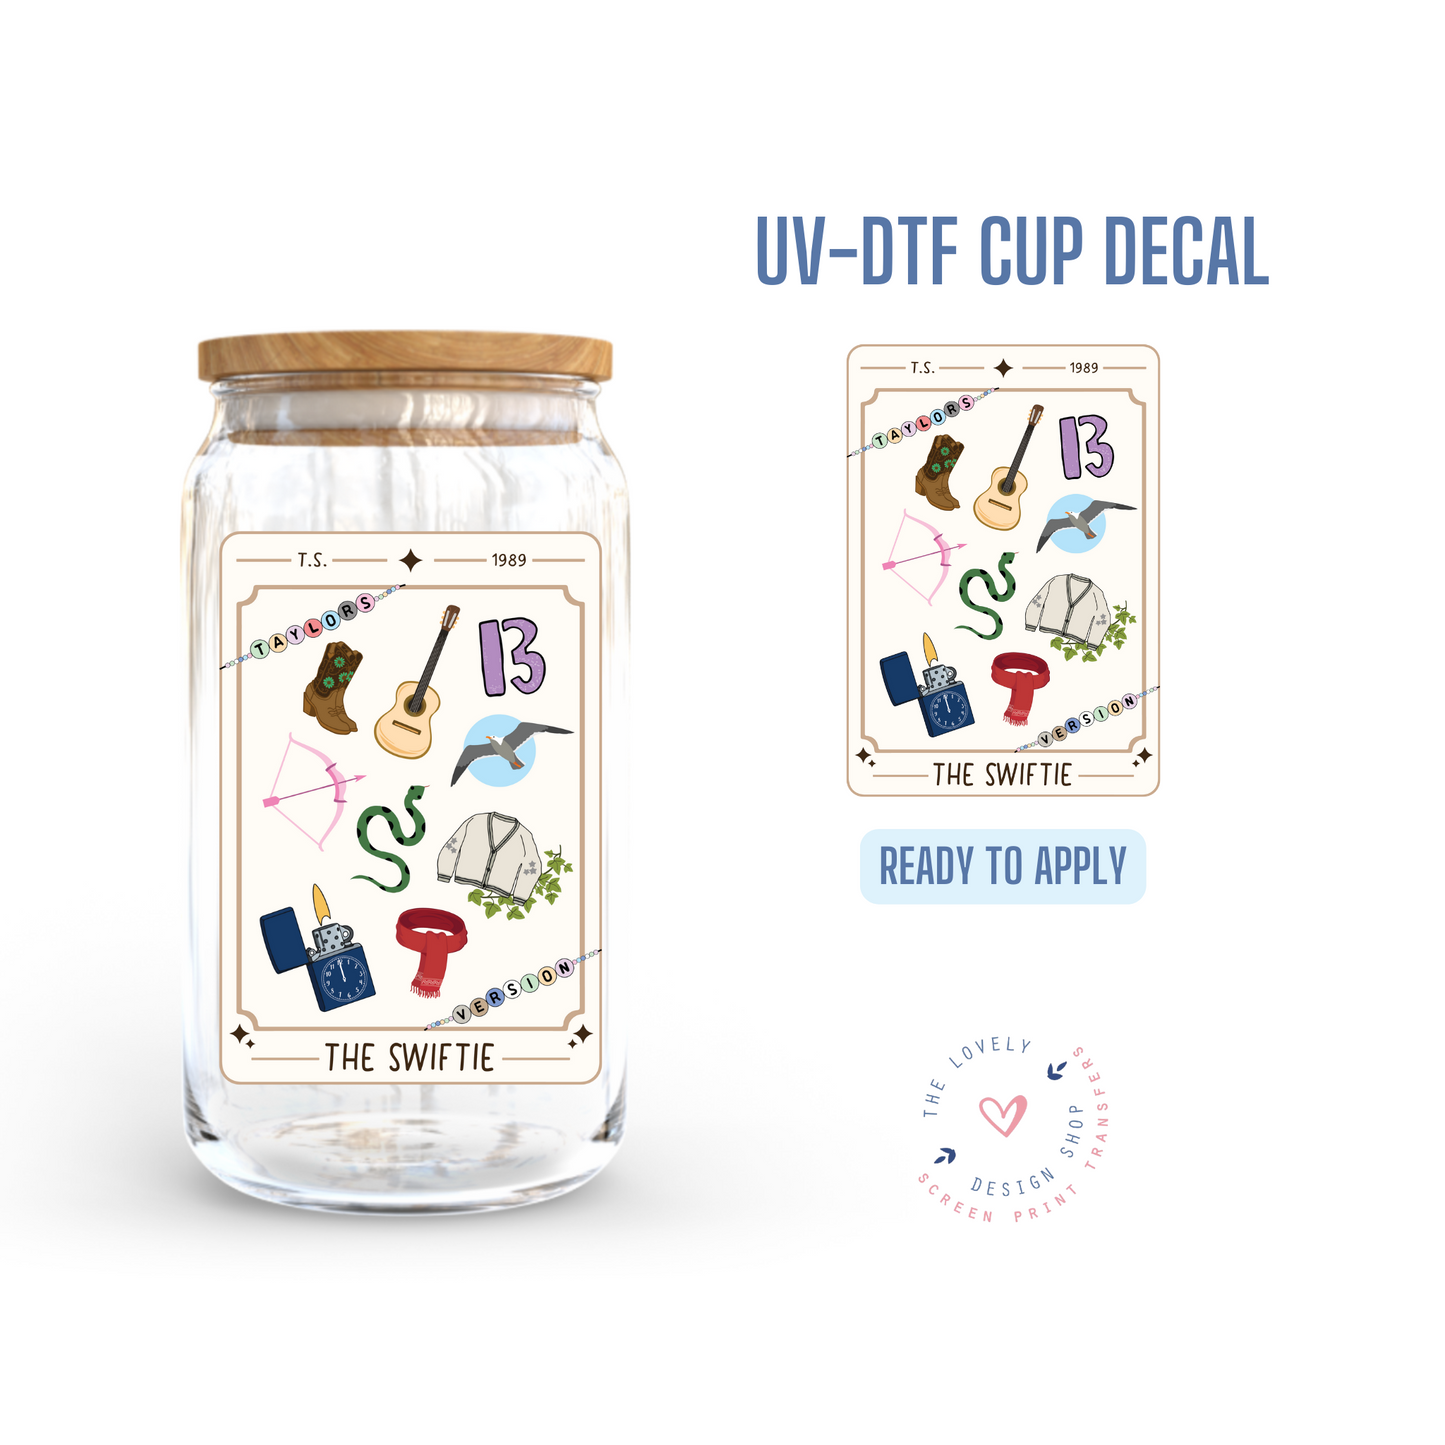 The Swiftie - UV DTF Cup Decal (Ready to Ship) Apr 29